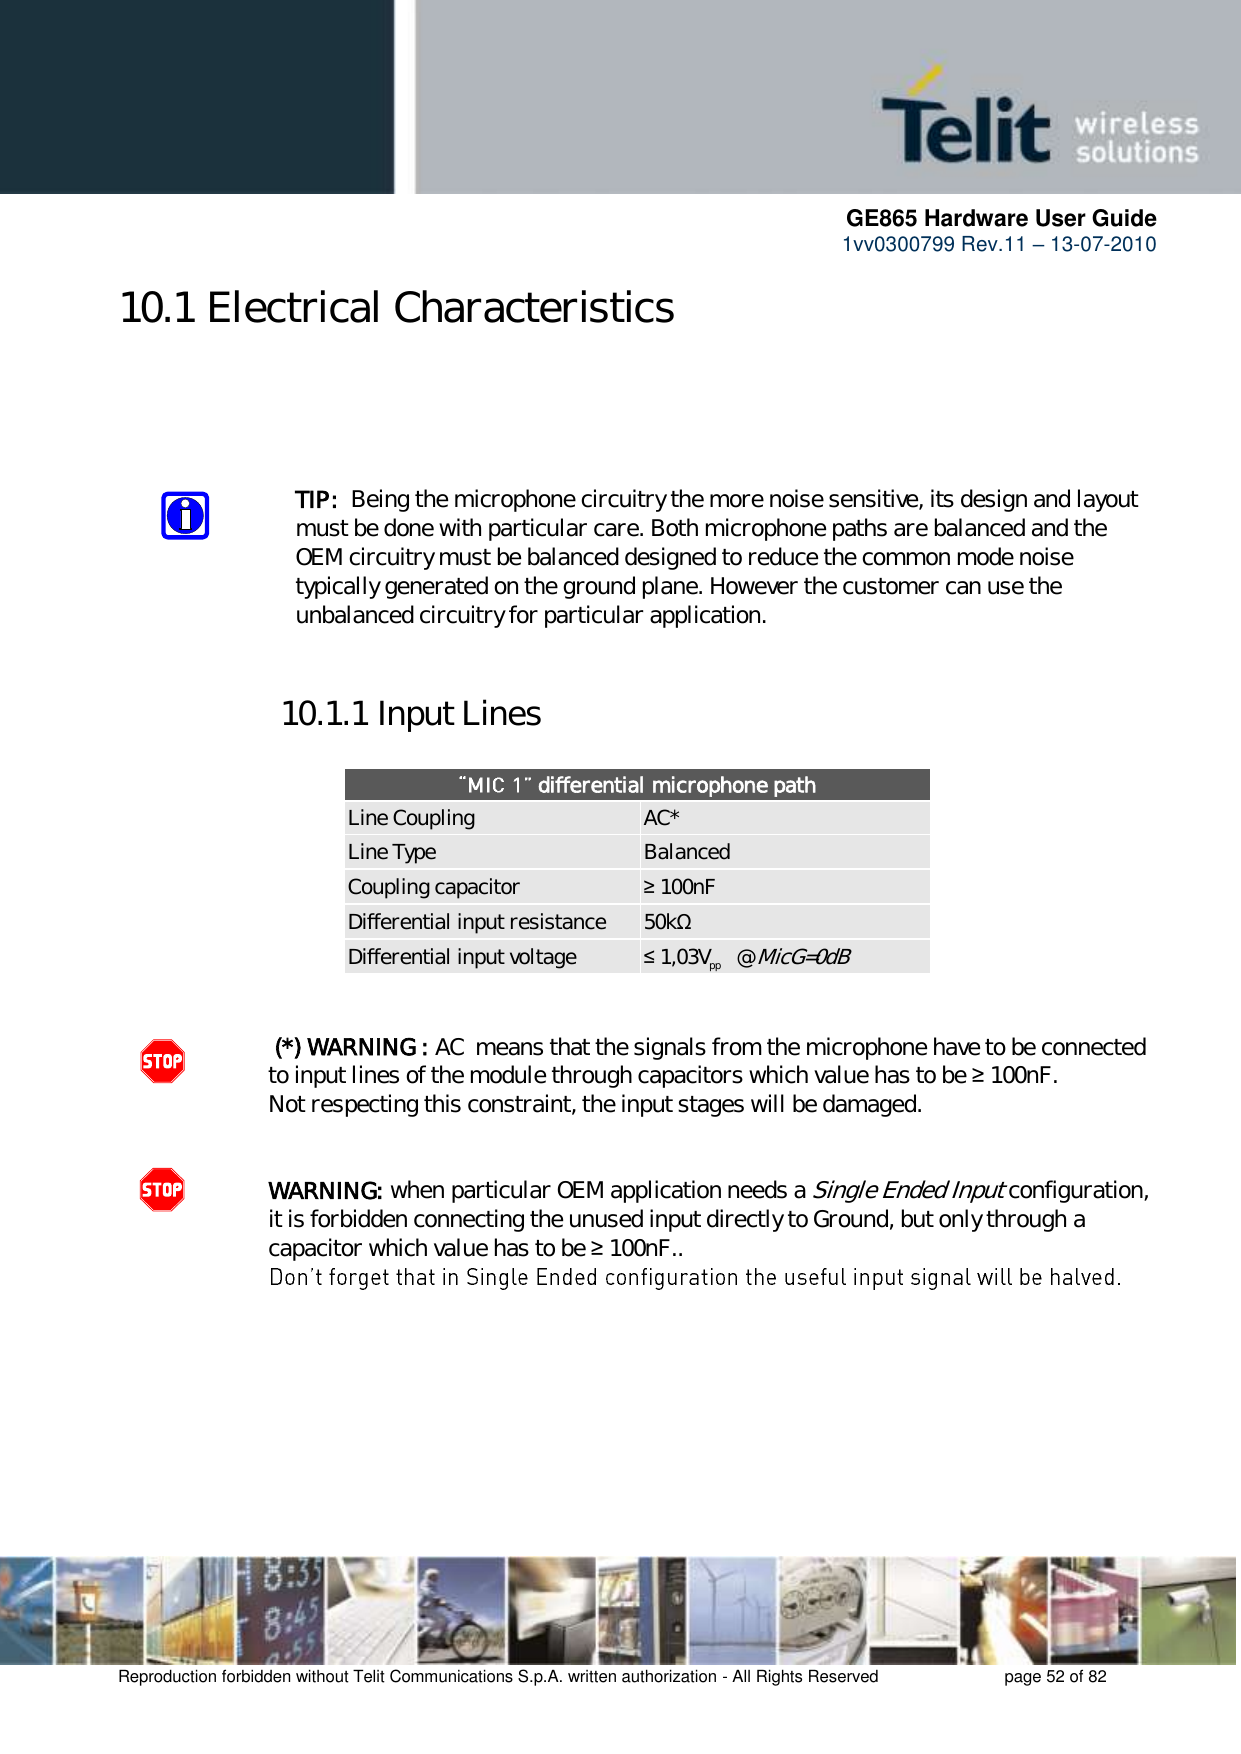      GE865 Hardware User Guide 1vv0300799 Rev.11 – 13-07-2010       Reproduction forbidden without Telit Communications S.p.A. written authorization - All Rights Reserved    page 52 of 82  10.1 Electrical Characteristics     TIP:  Being the microphone circuitry the more noise sensitive, its design and layout must be done with particular care. Both microphone paths are balanced and the OEM circuitry must be balanced designed to reduce the common mode noise typically generated on the ground plane. However the customer can use the unbalanced circuitry for particular application.  10.1.1 Input Lines   differential microphone path Line Coupling AC* Line Type Balanced Coupling capacitor ≥ 100nF Differential input resistance 50kΩ Differential input voltage ≤ 1,03Vpp   @ MicG=0dB    (*) WARNING : AC  means that the signals from the microphone have to be connected to input lines of the module through capacitors which value has to be ≥ 100nF.           Not respecting this constraint, the input stages will be damaged.   WARNING: when particular OEM application needs a Single Ended Input configuration, it is forbidden connecting the unused input directly to Ground, but only through a capacitor which value has to be ≥ 100nF..           